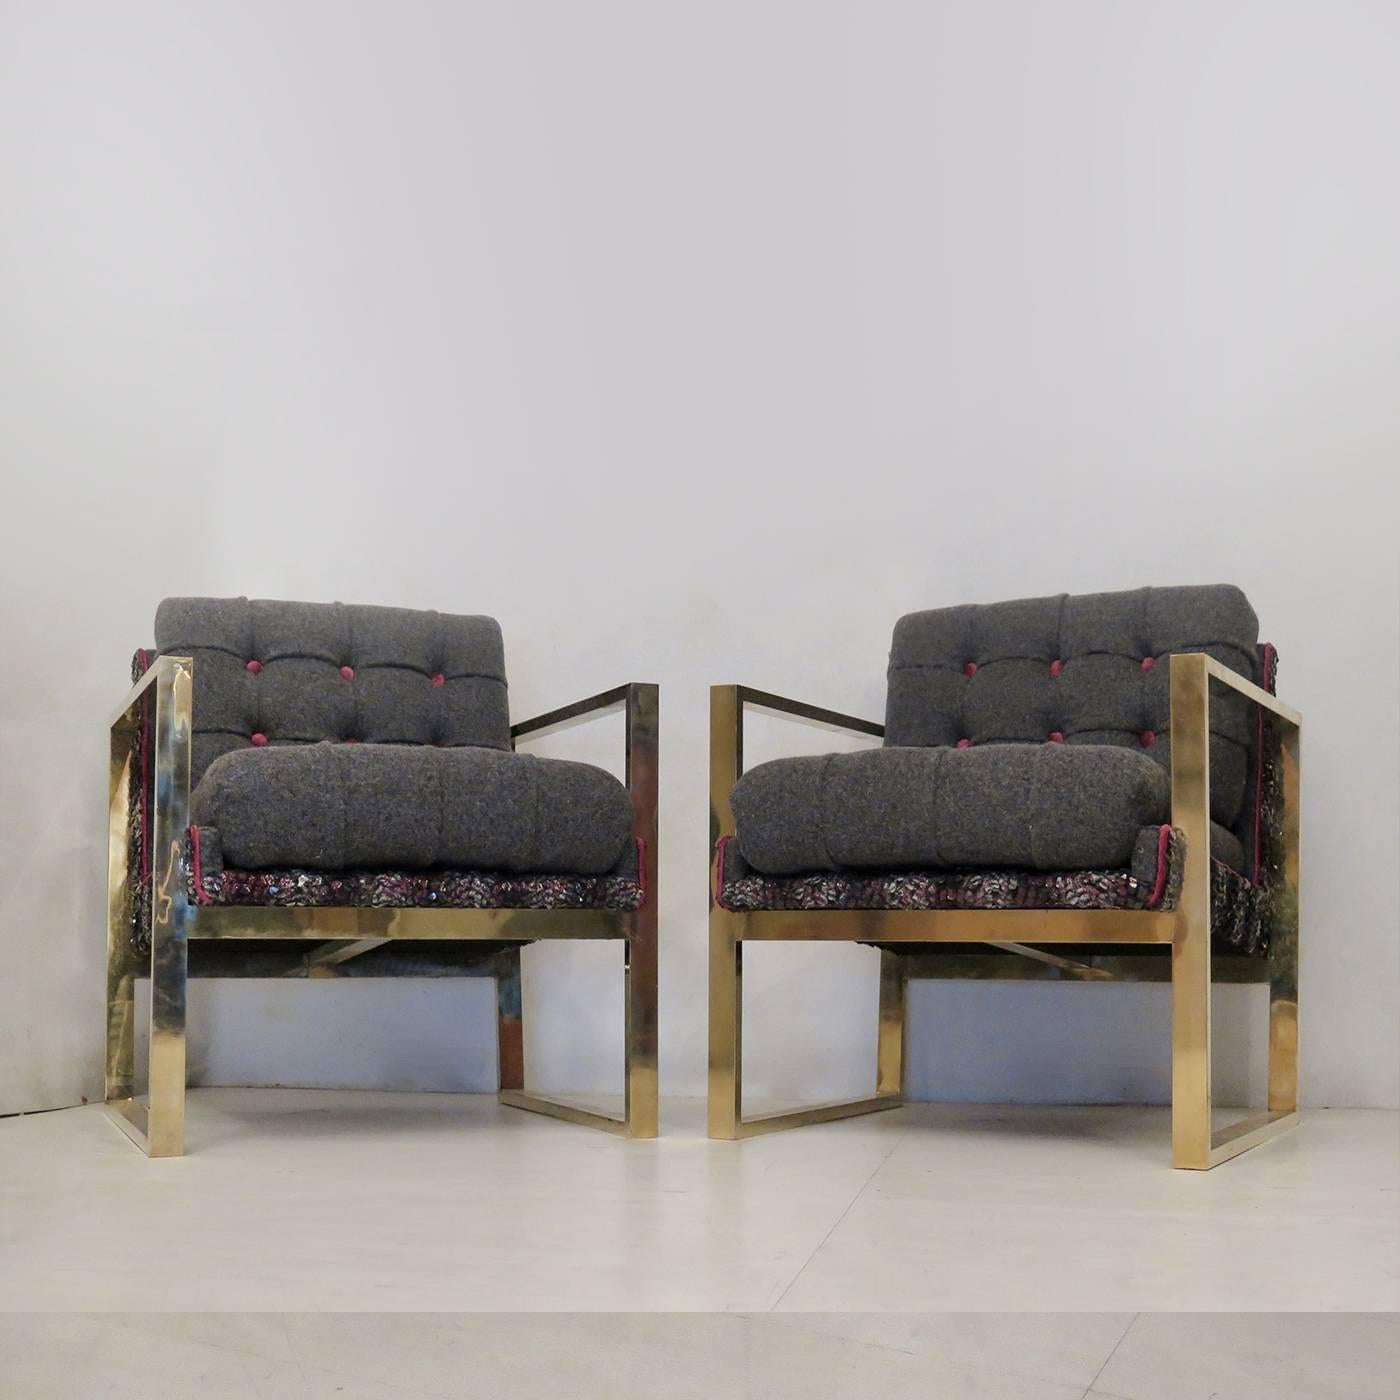 This exemplary set of armchairs will make the perfect addition to any home when placed in a contemporary room. The geometric brass structure strikingly contrasts with the soft curves of the comfortable cushions. The bases of seat and backrest in